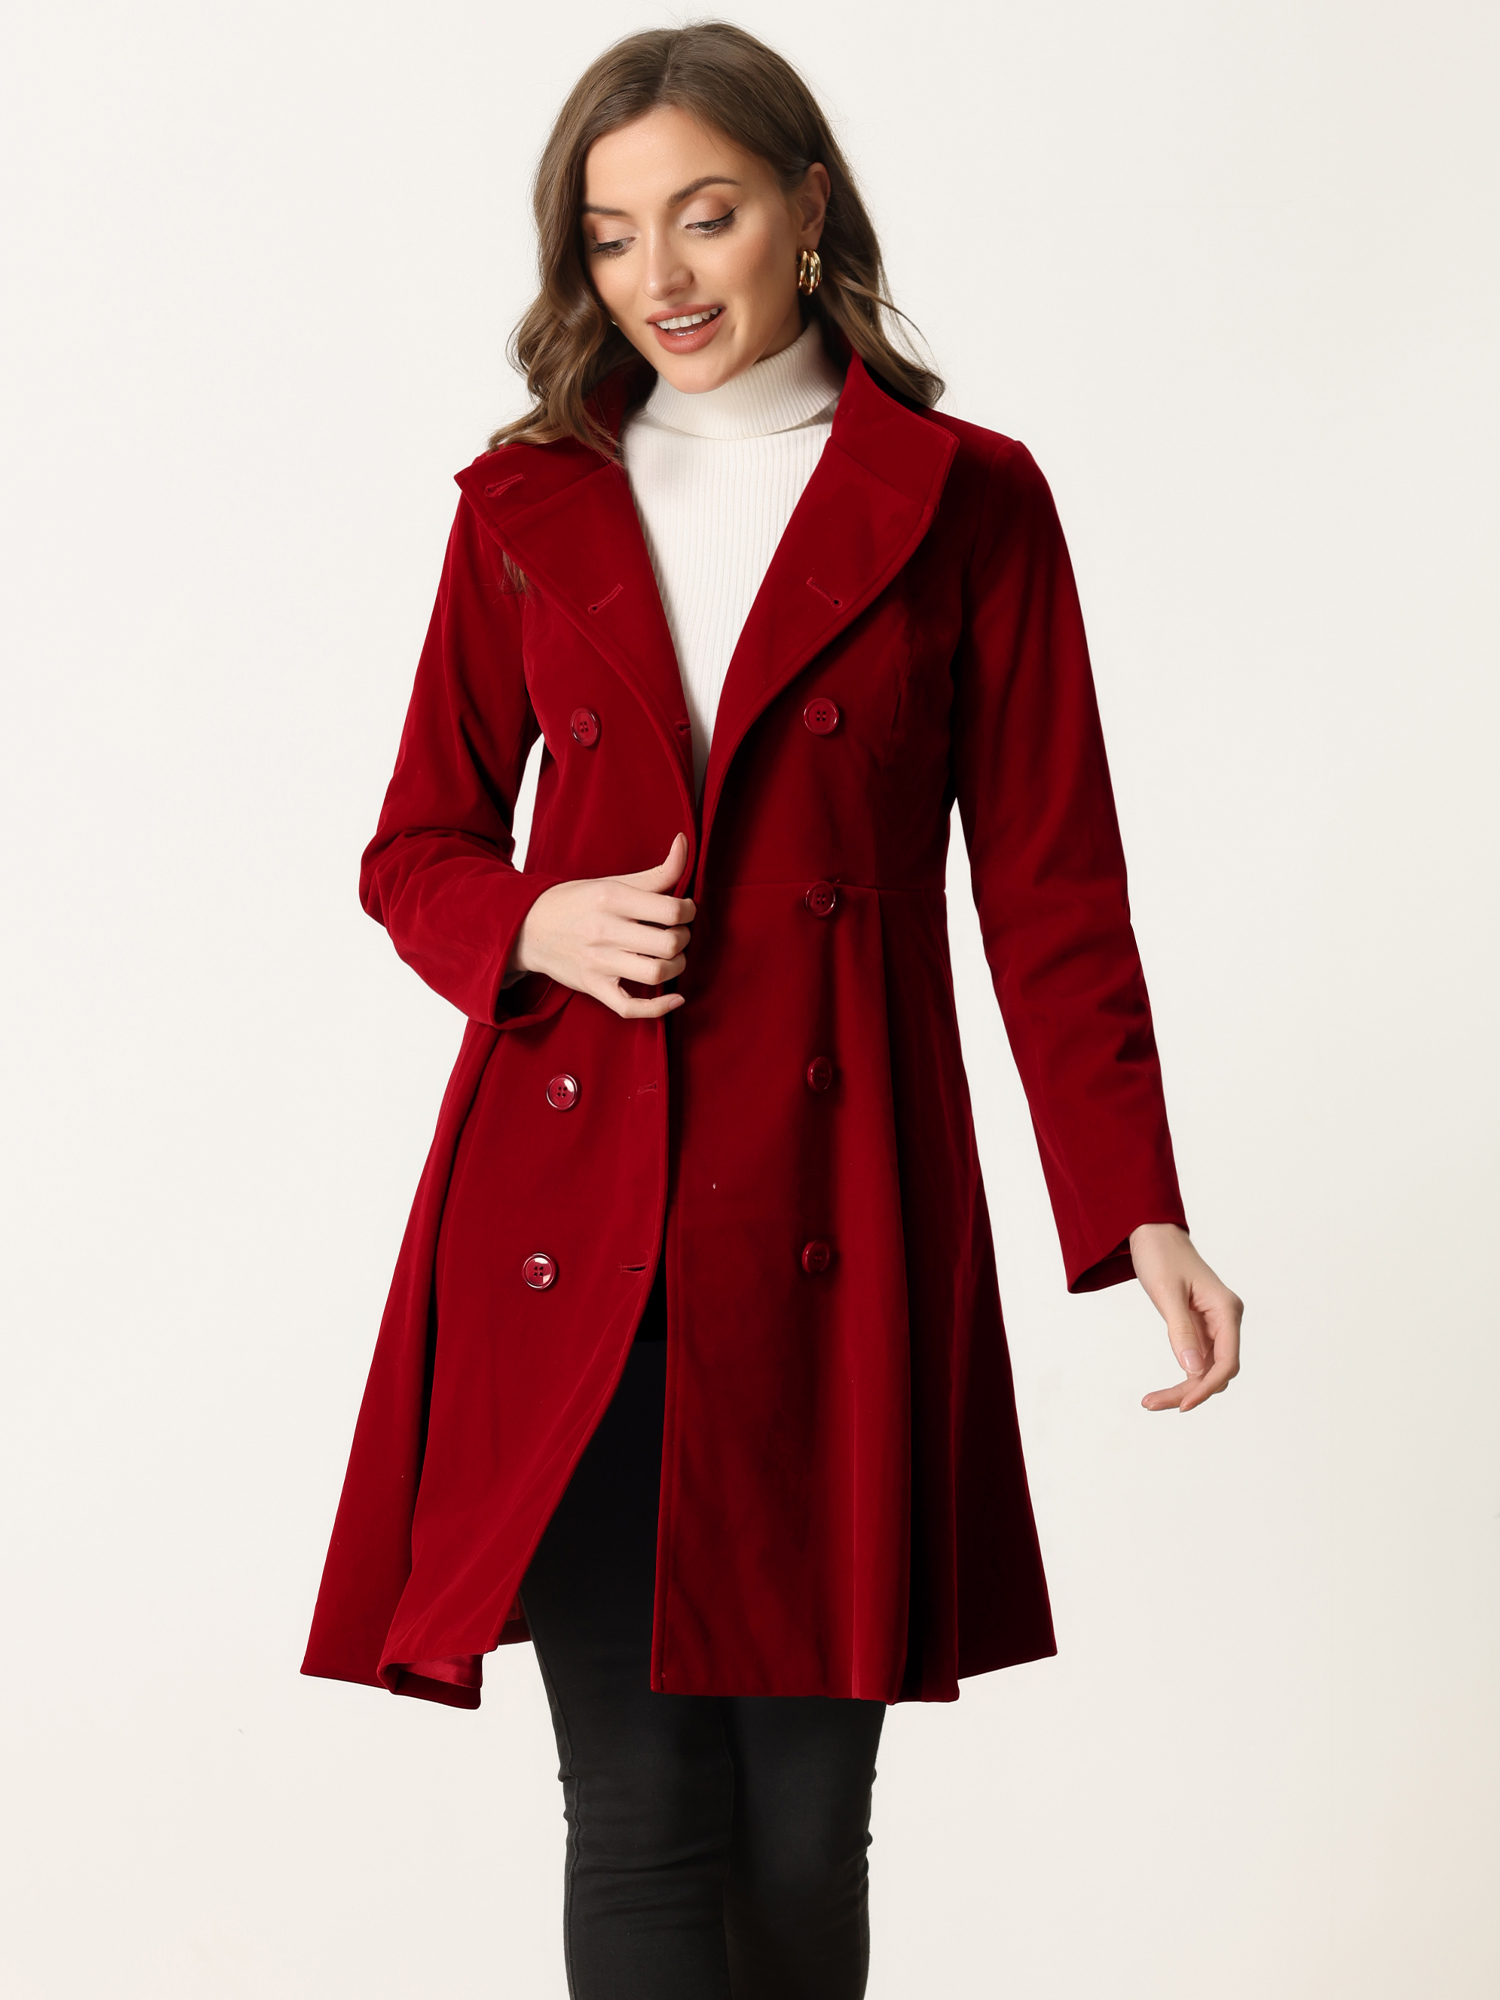 Unique Bargains Velvet A-Line Coat for Women's Stand Collar Double Breasted Winter Trench Coats